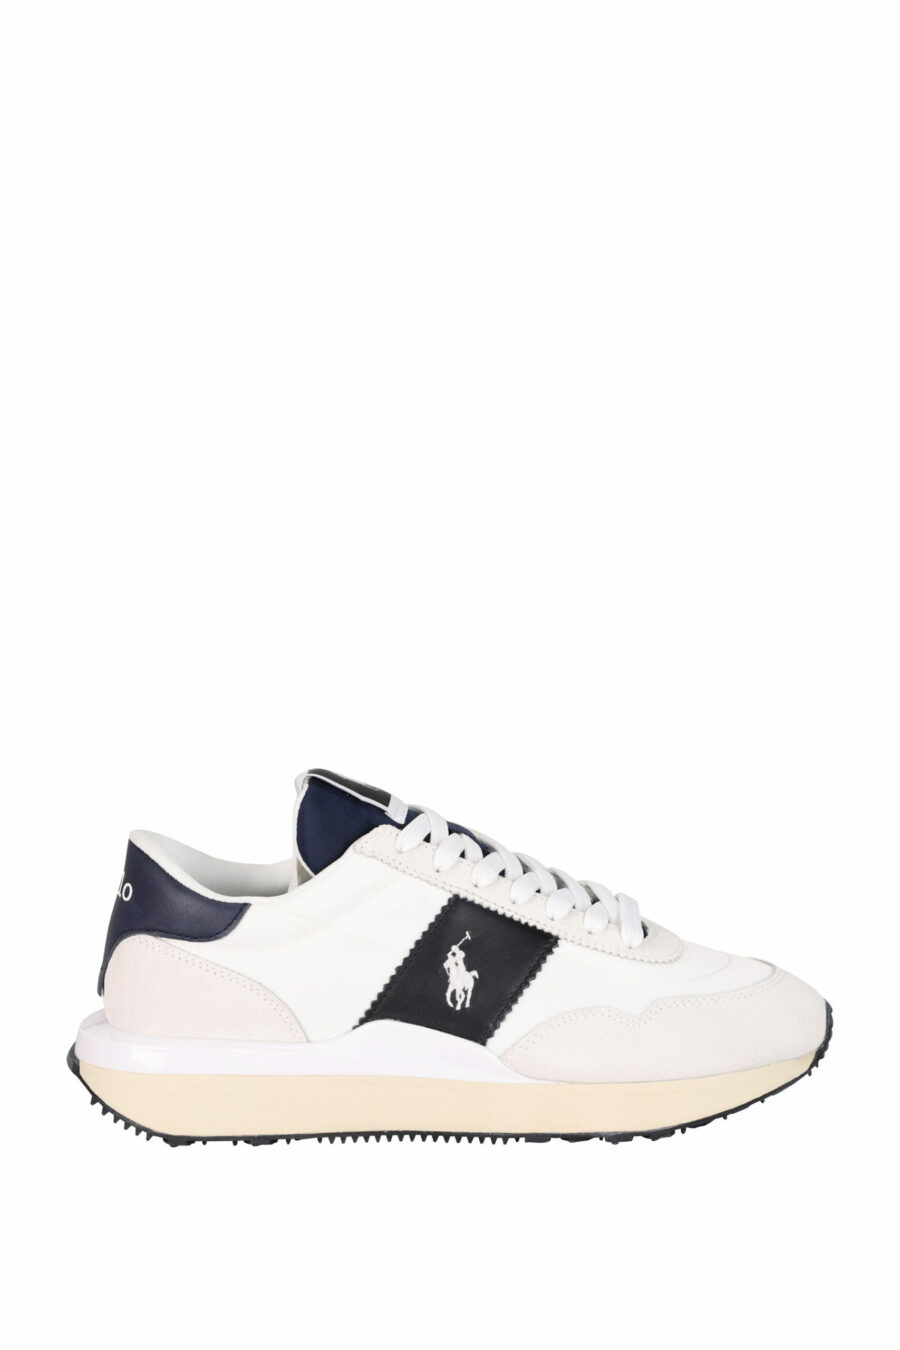 Trainers white and blue detail "train" with white "polo" minilogue - 3616535114890 scaled